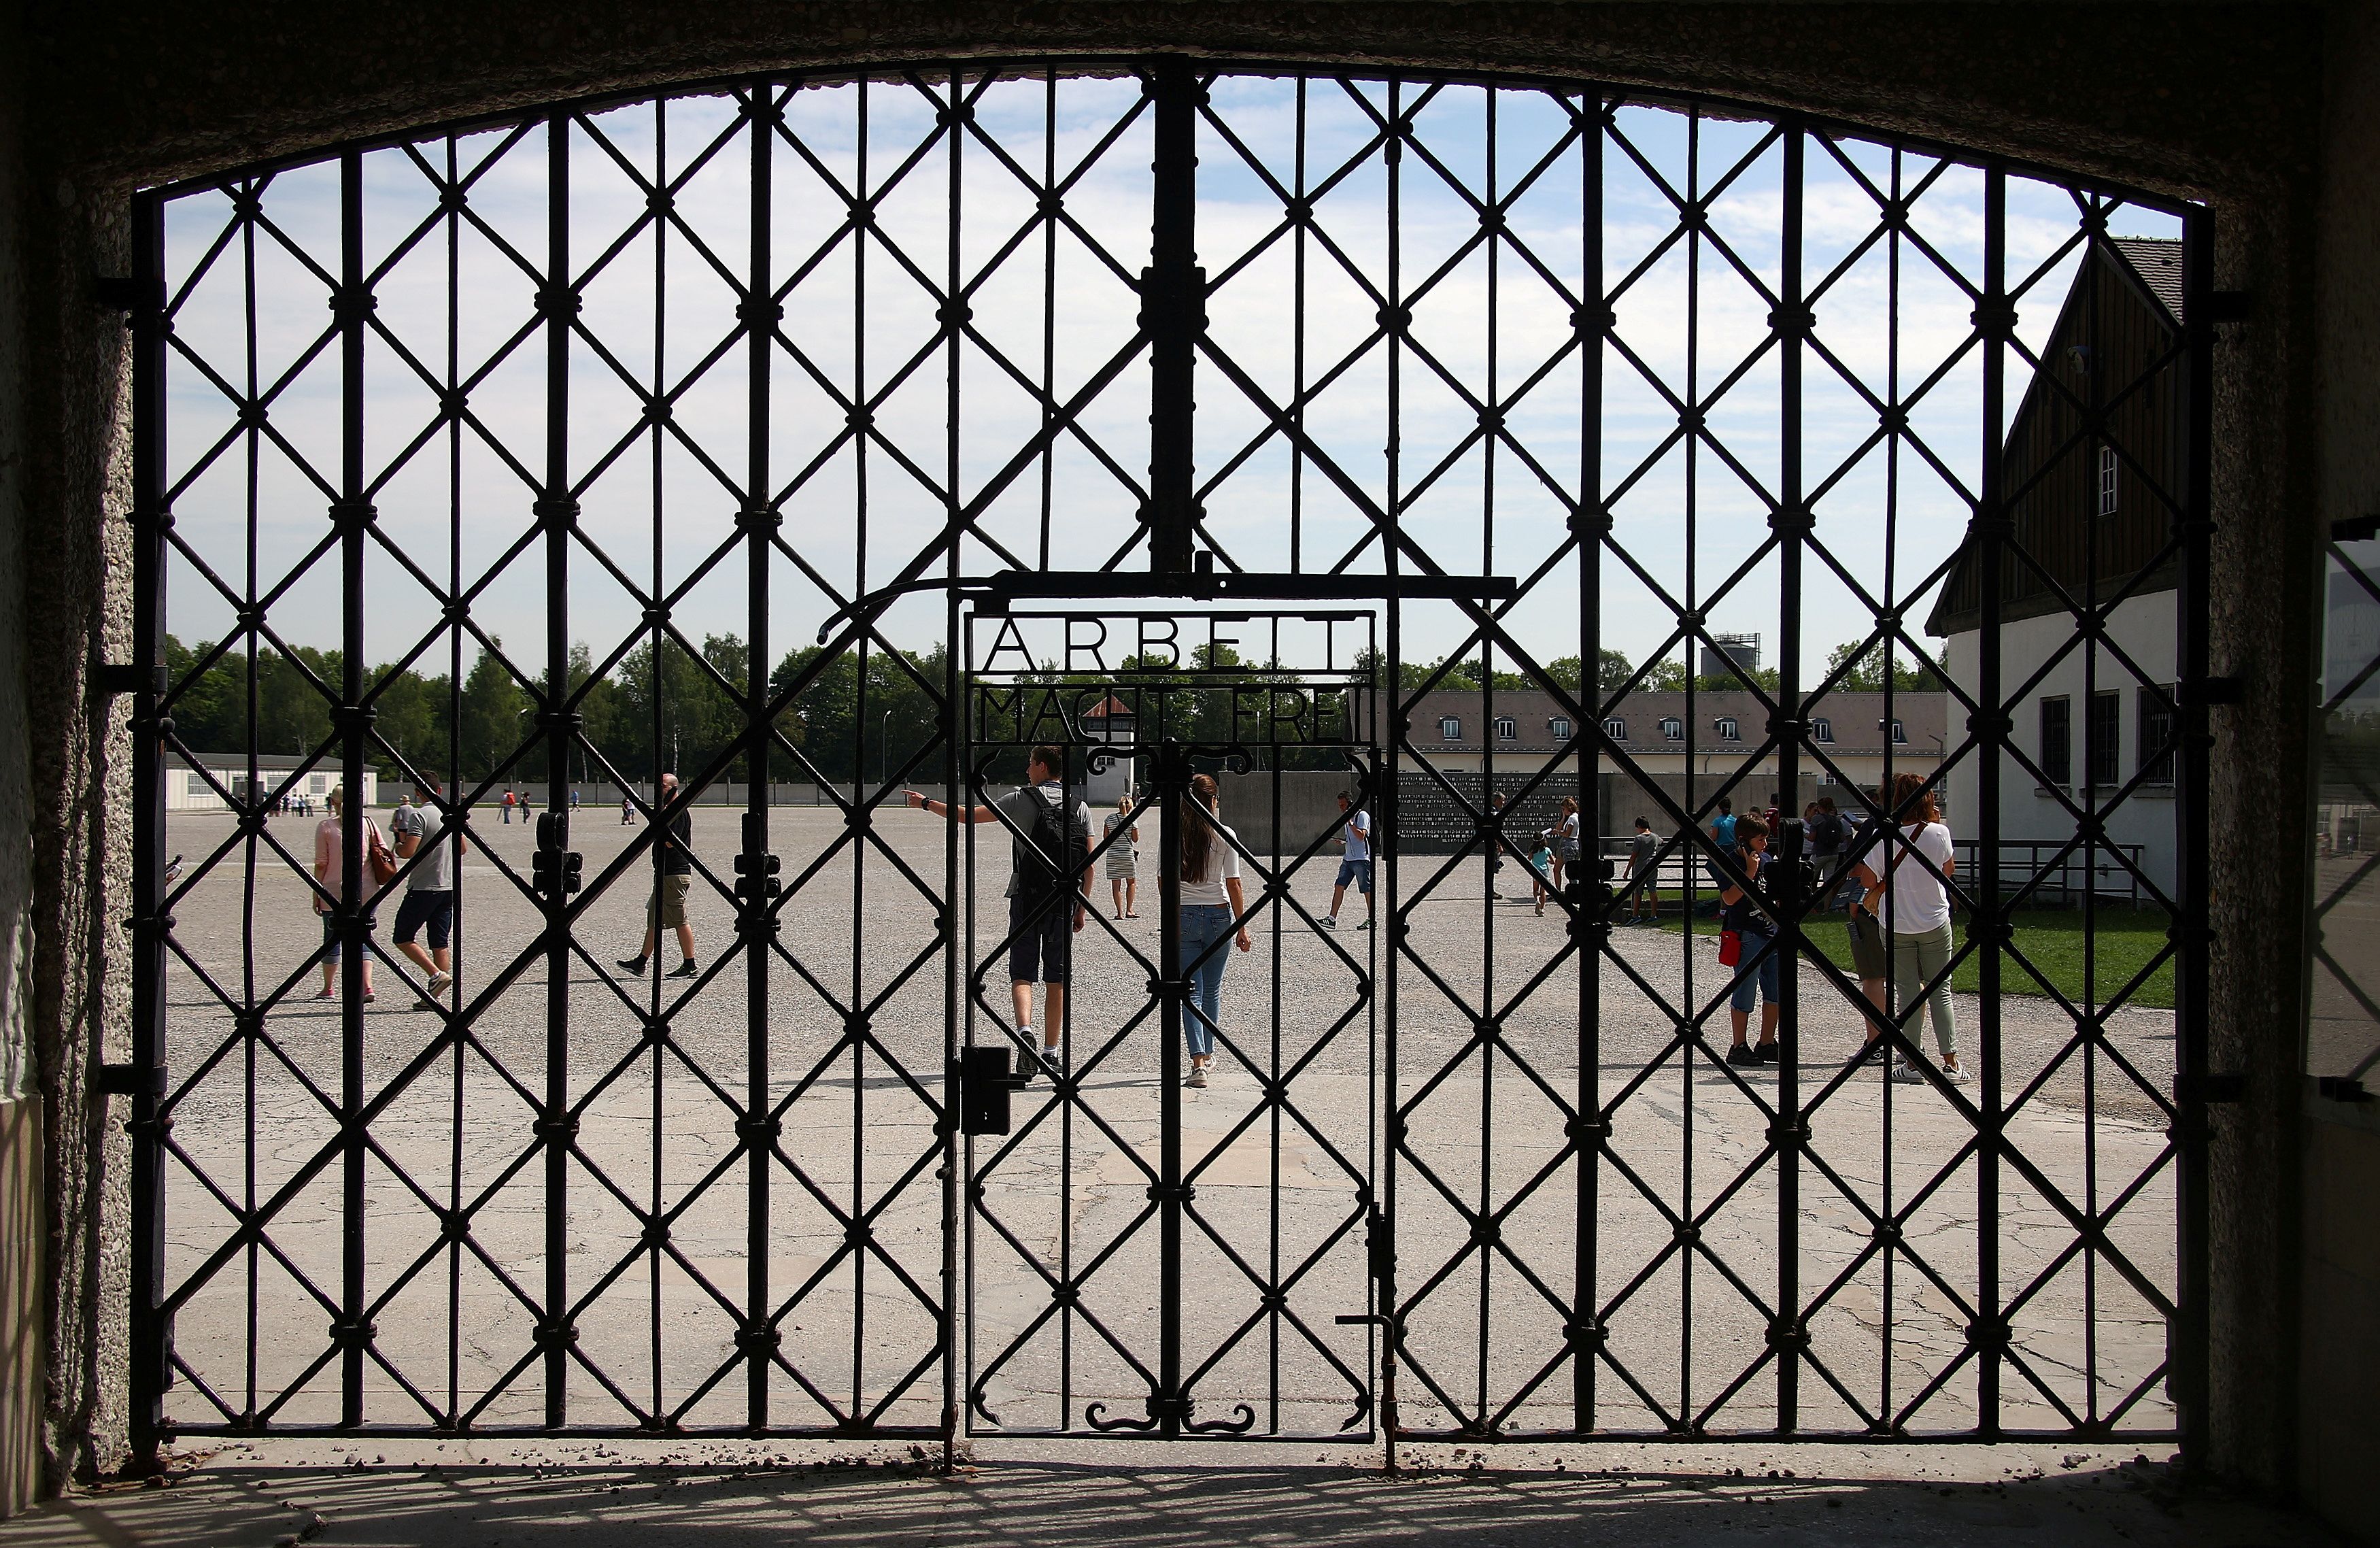 The entrance of the former German Nazi concentration camp in Dachau near Munich